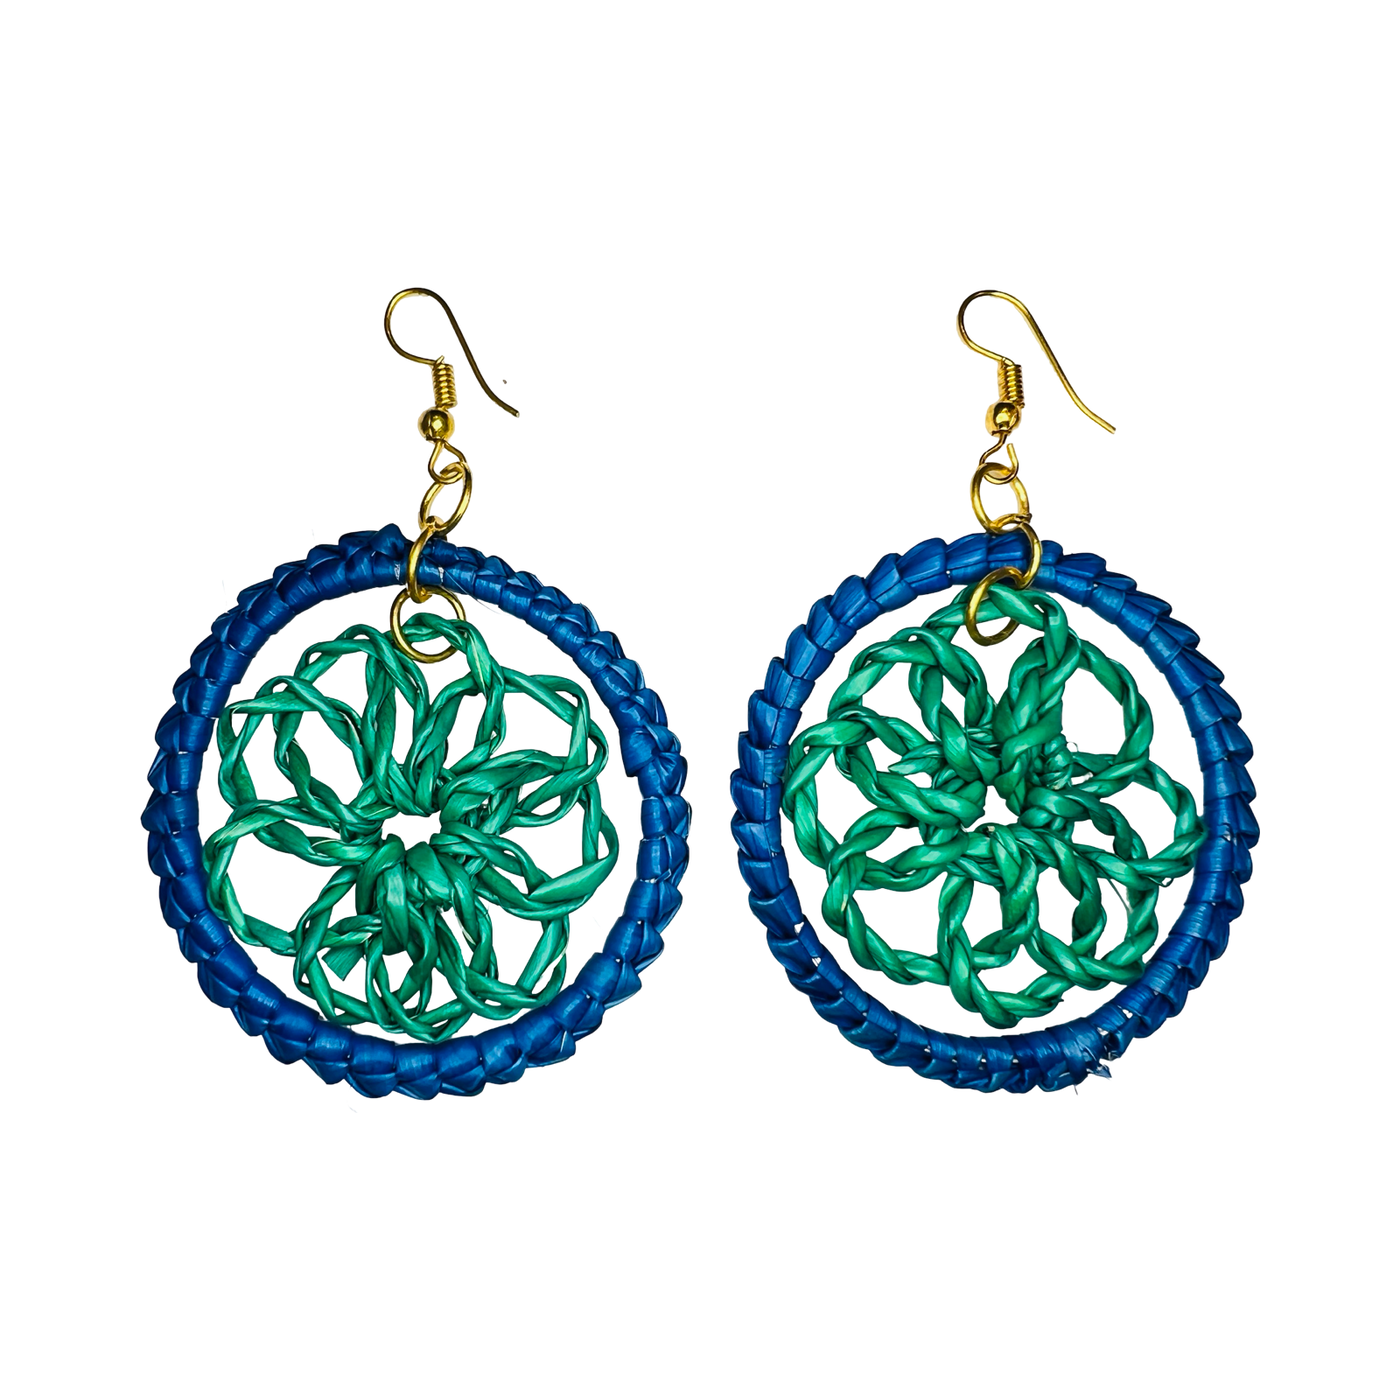 BLUE AND TEAL PALM HOOP EARRINGS WITH A FLORAL DESIGN